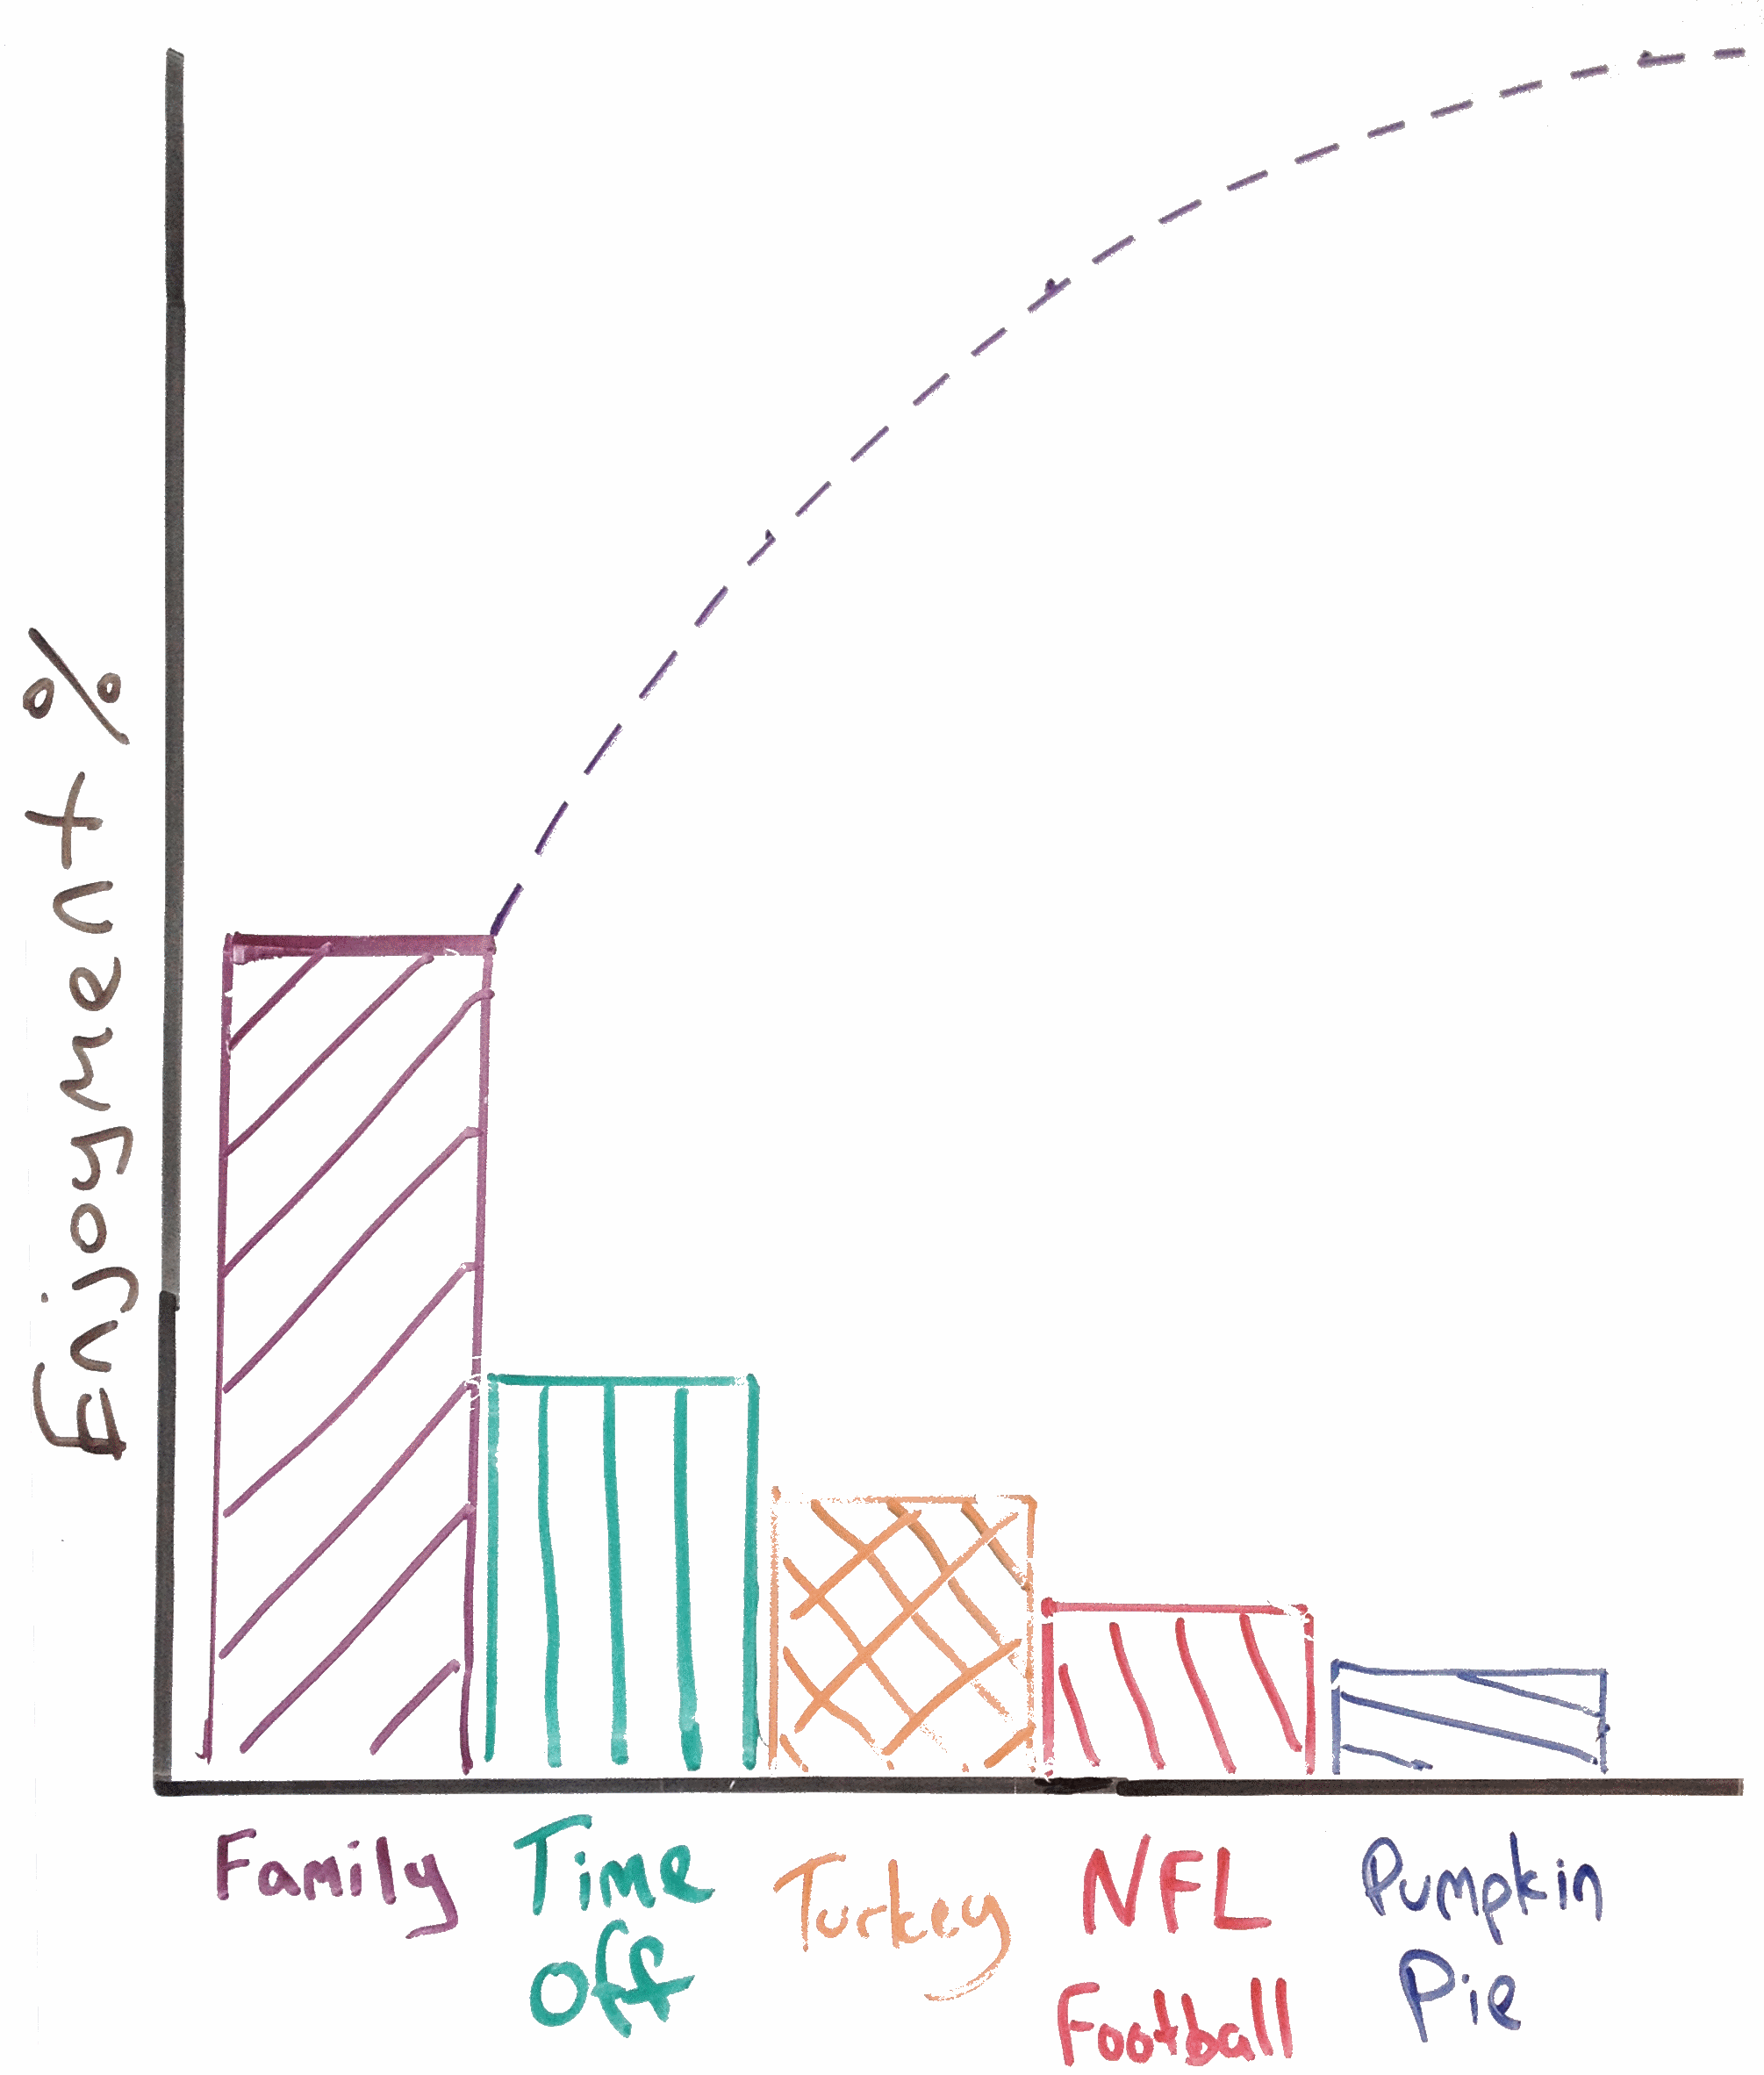 A whiteboard illustration of a pareto diagram depicting a thanksgiving holiday